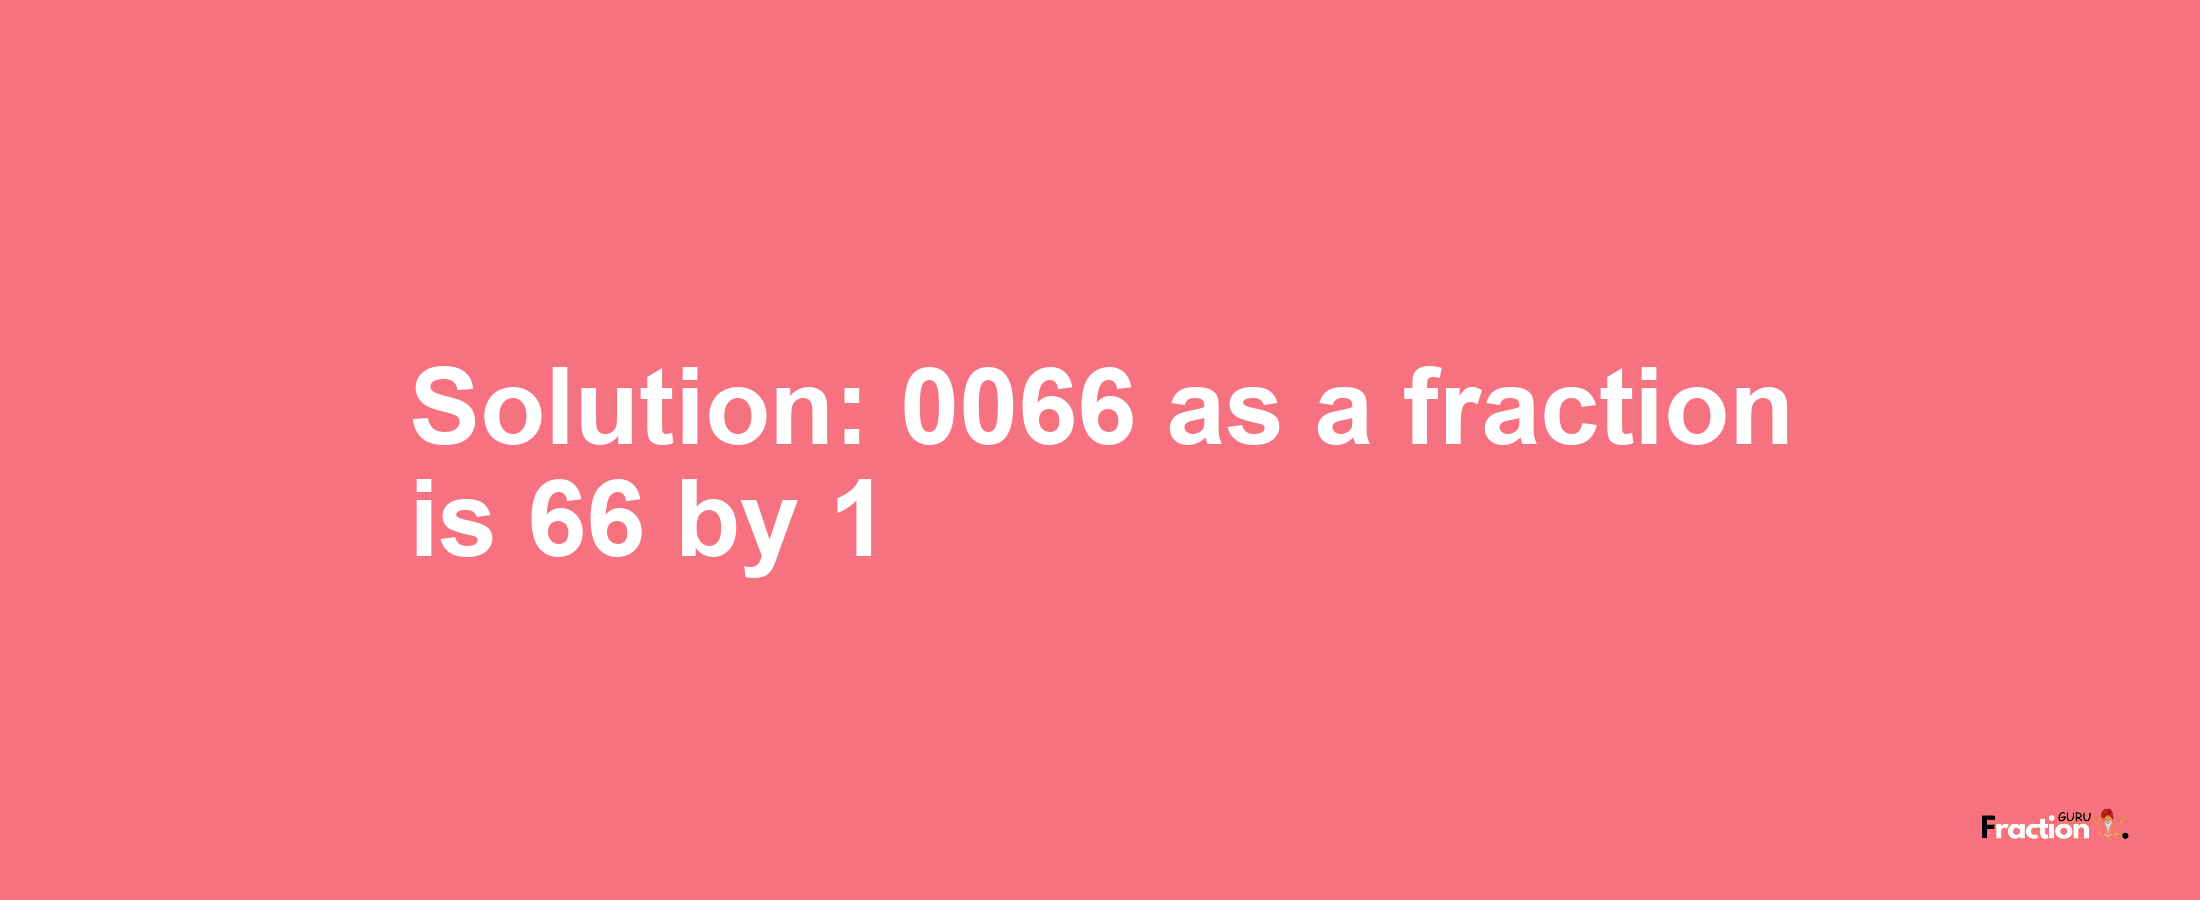 Solution:0066 as a fraction is 66/1